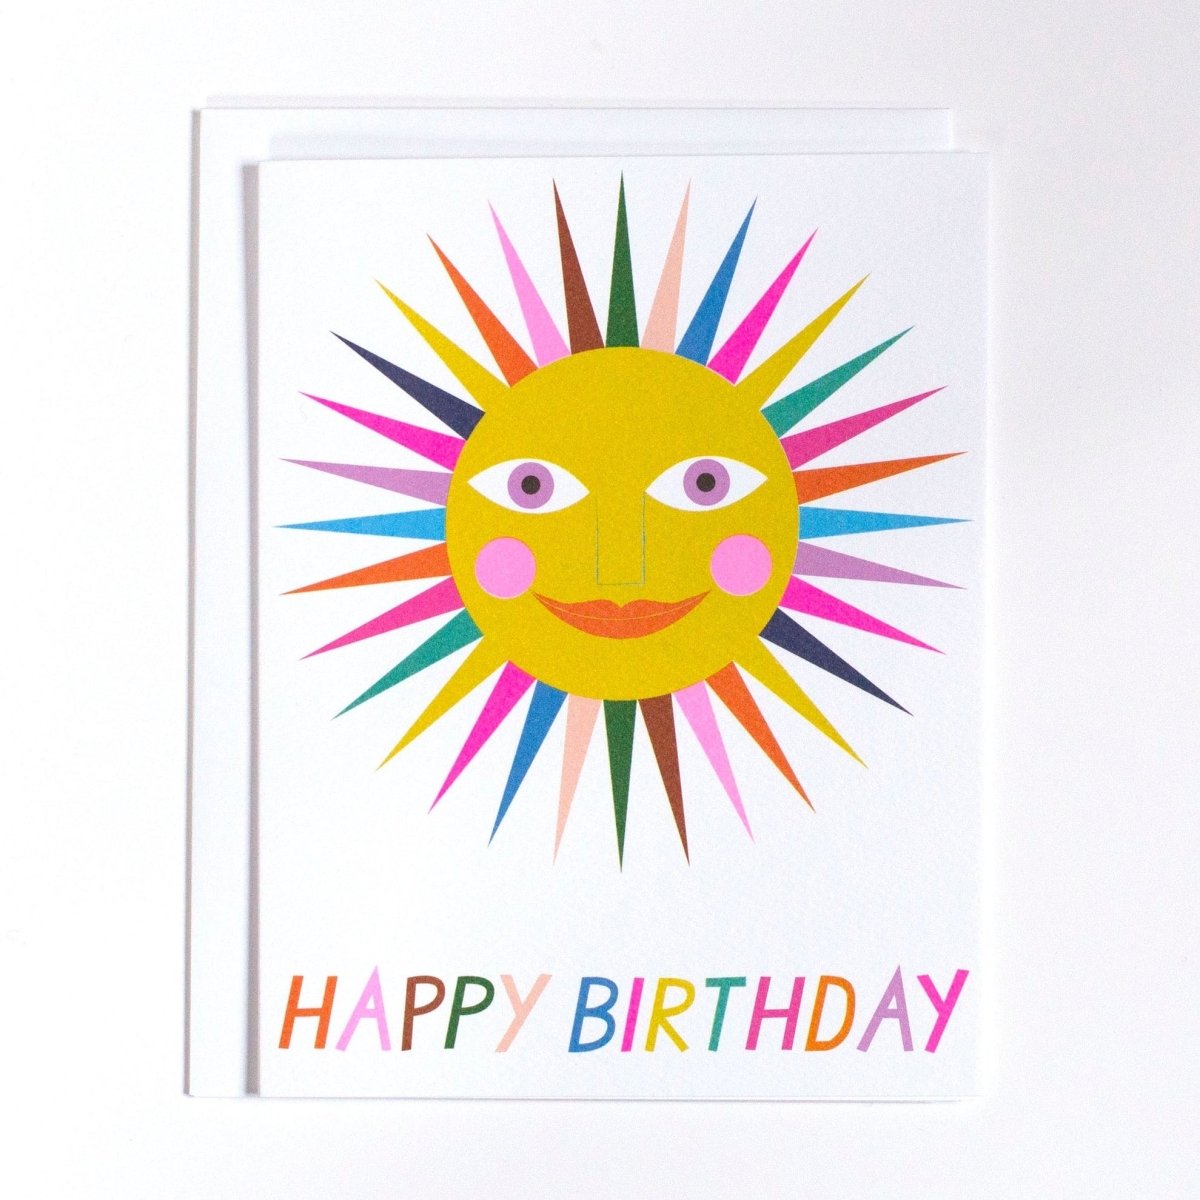 White card shows image of a multicolored smiling sun. Card reads: "Happy Birthday." Made with recycled paper by Banquet Atelier in Vancouver, British Columbia, Canada.